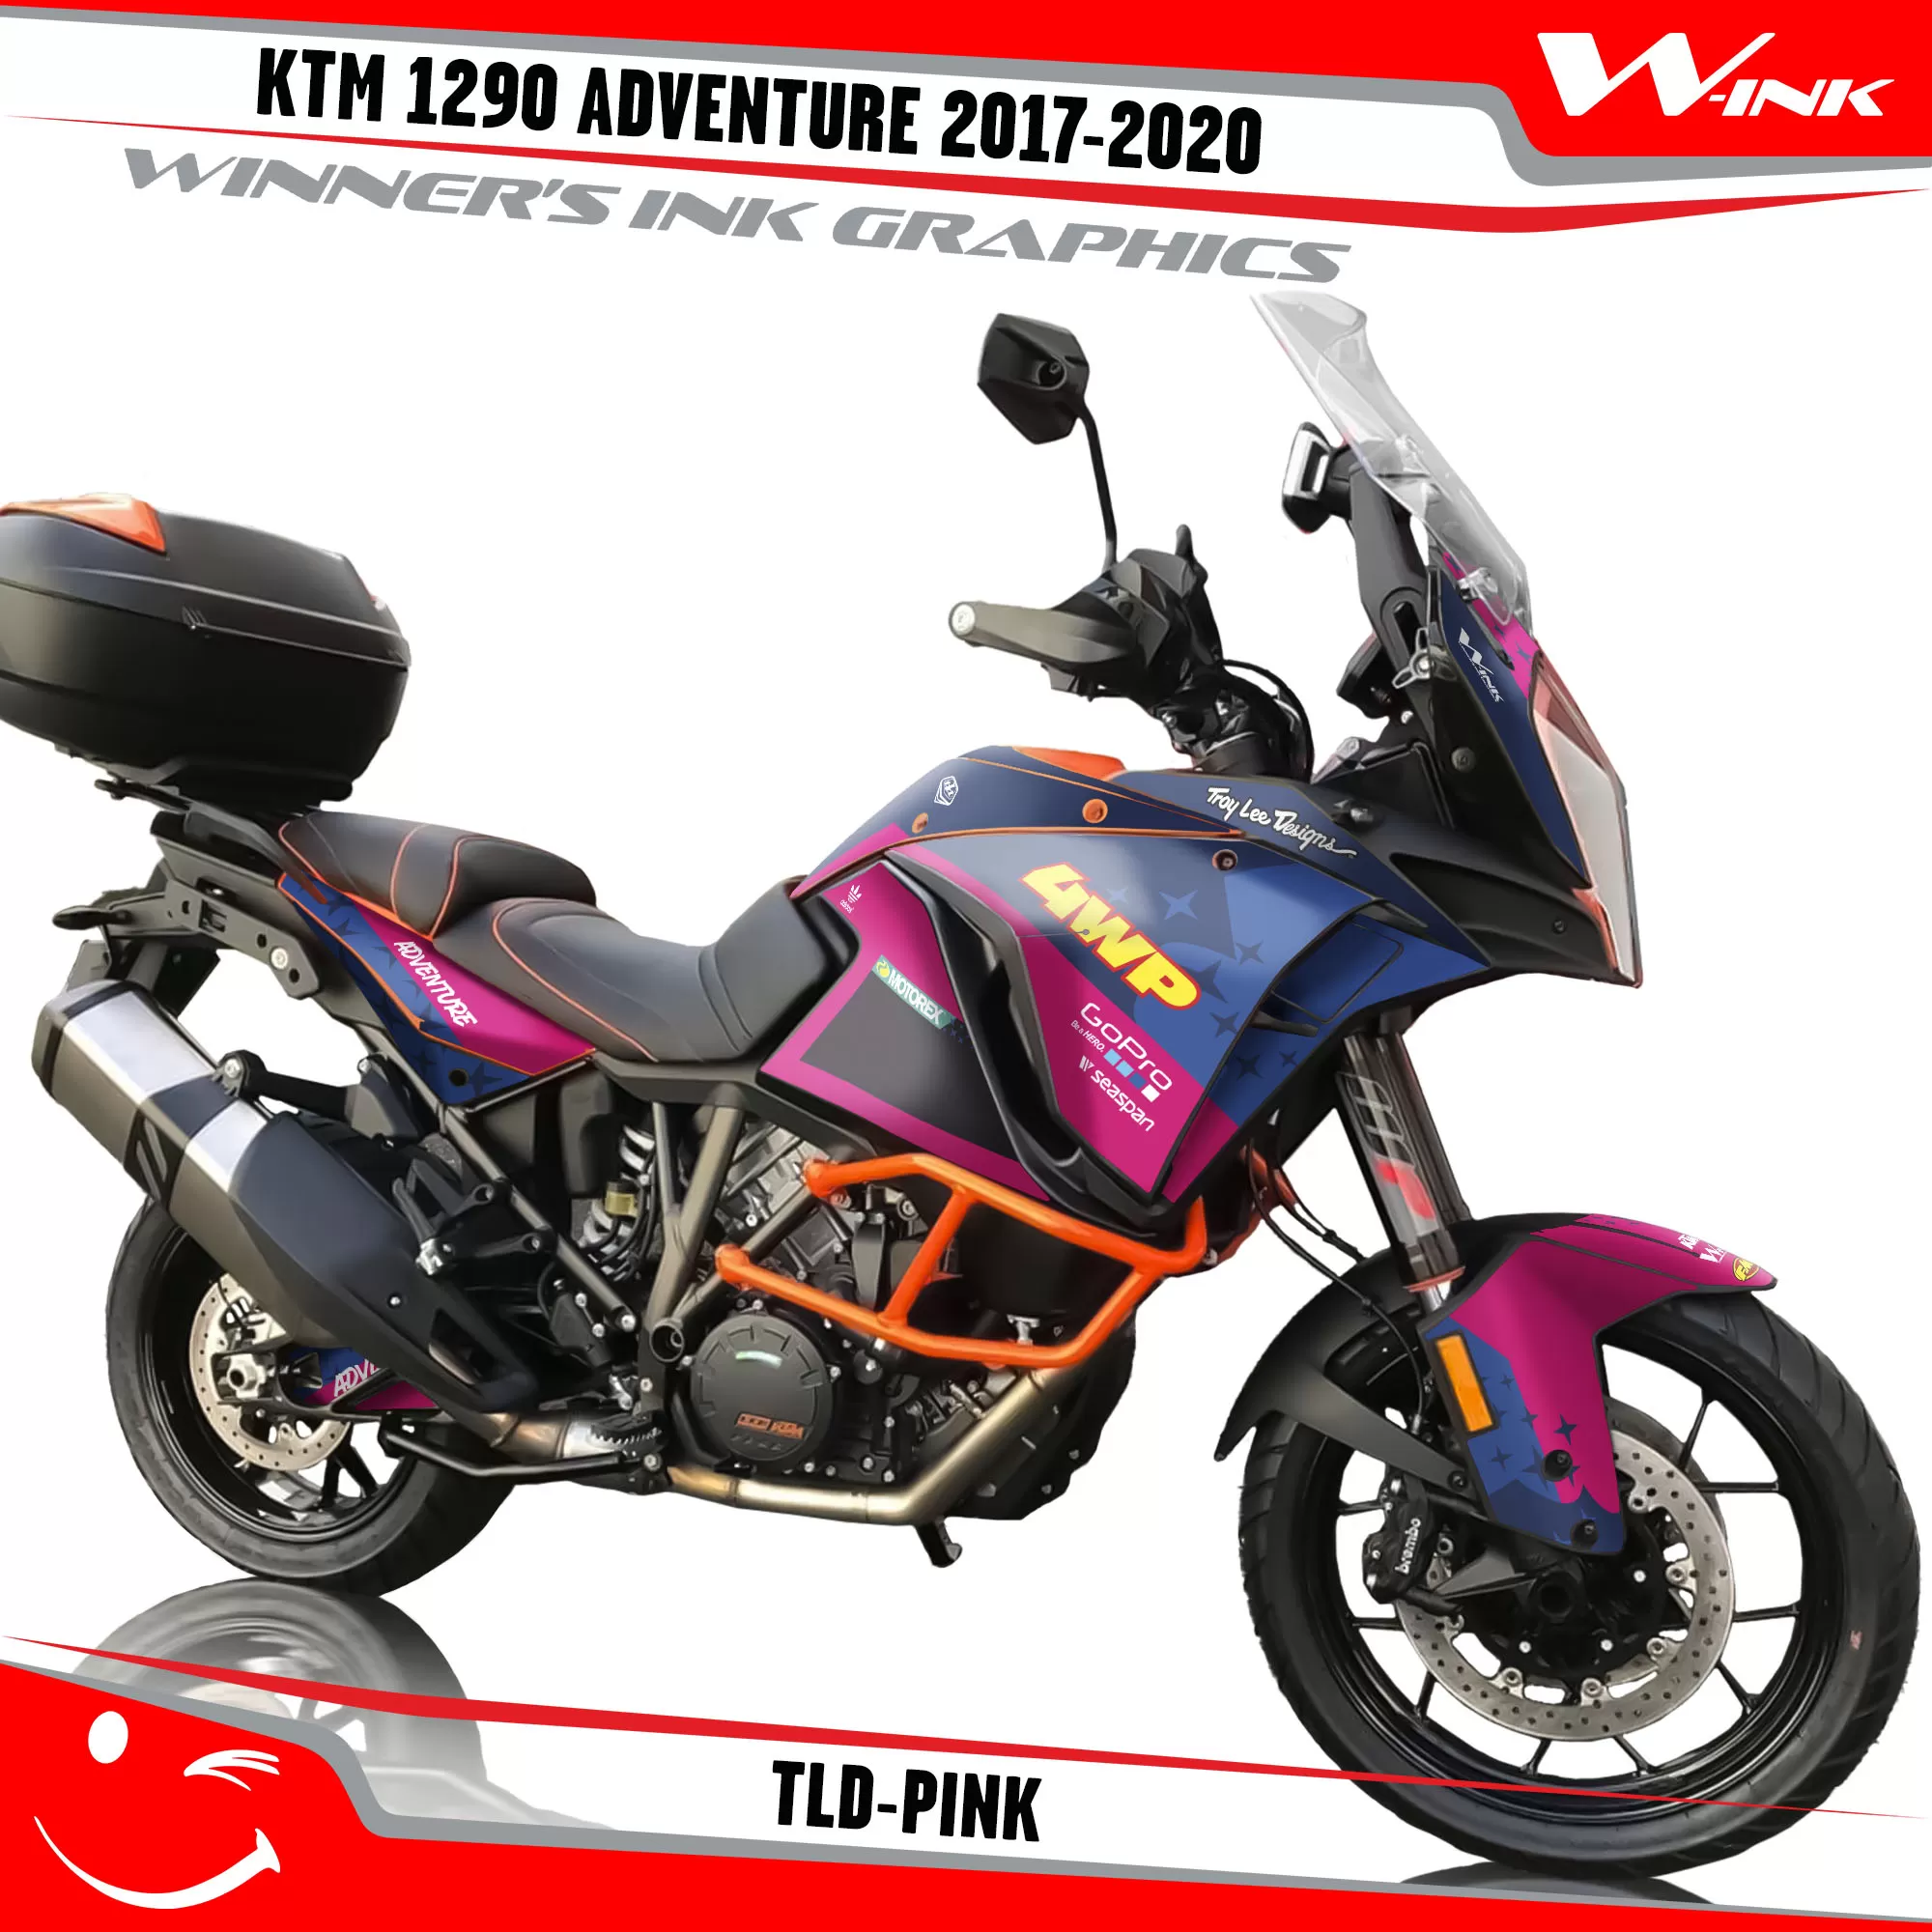 KTM-Adventure-1290-2017-2018-2019-2020-graphics-kit-and-decals-TLD-Pink